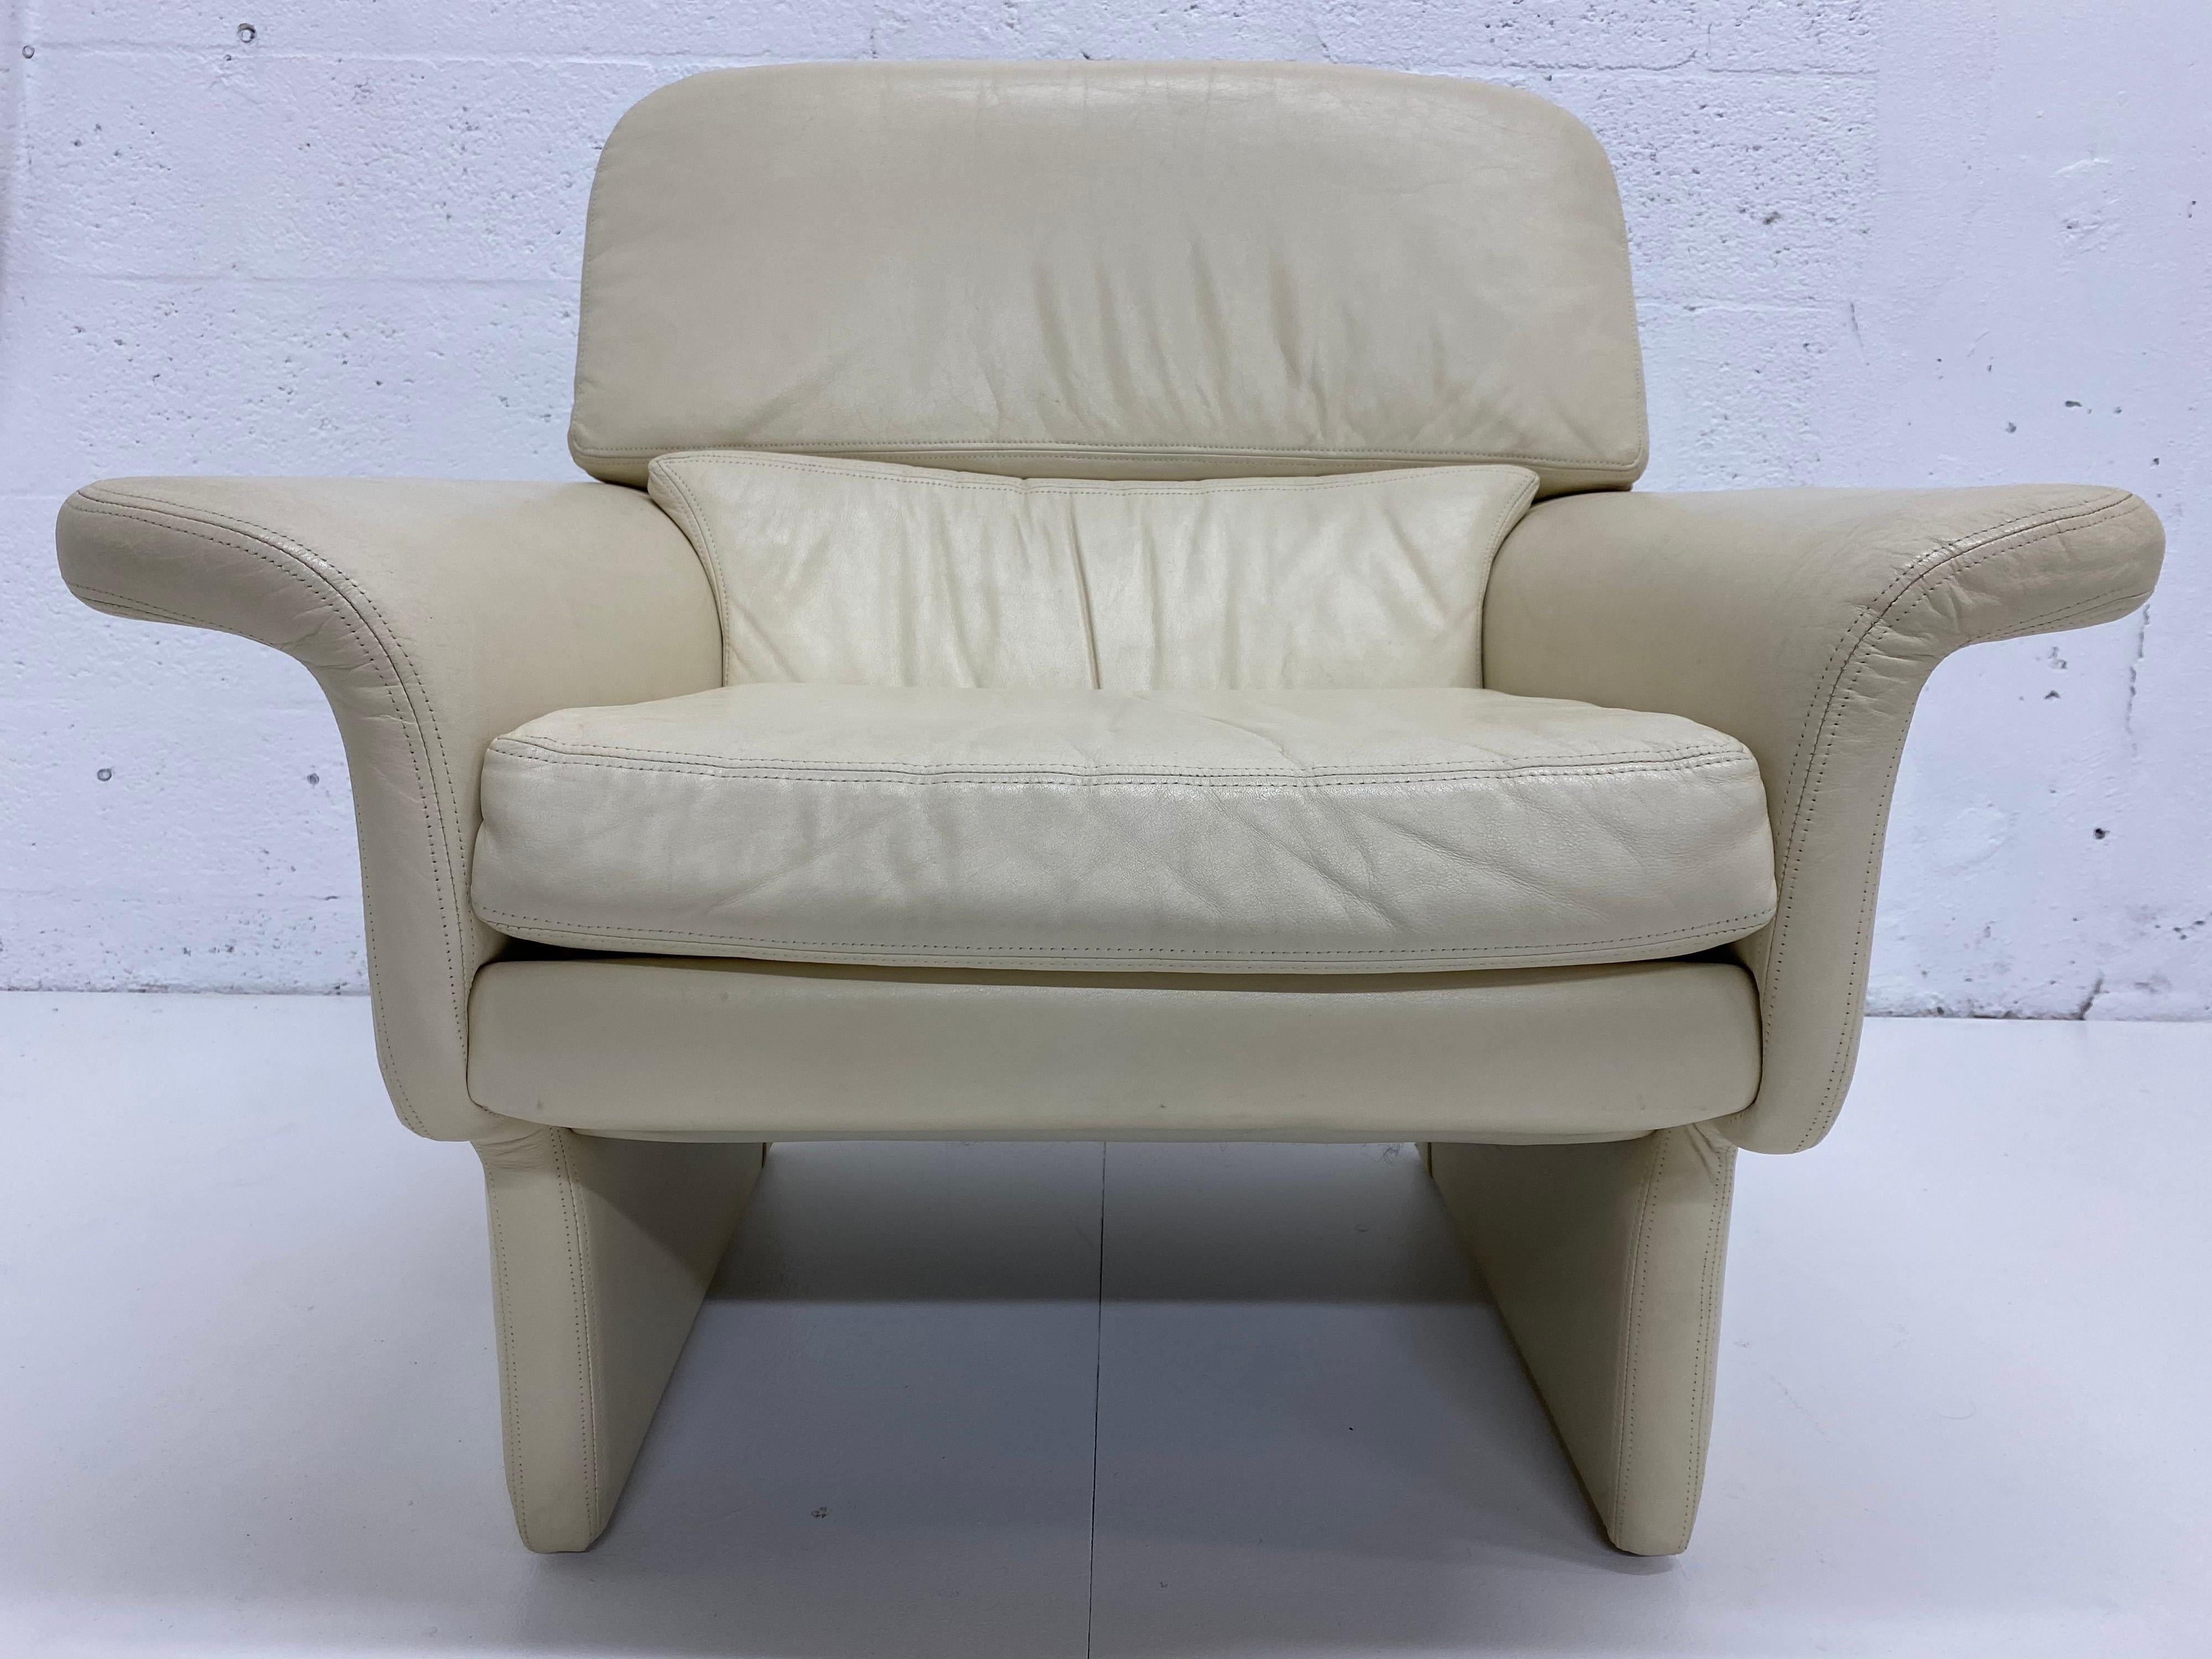 American Vladimir Kagan Attr. Cream Leather Lounge Chair for Preview, 1980s